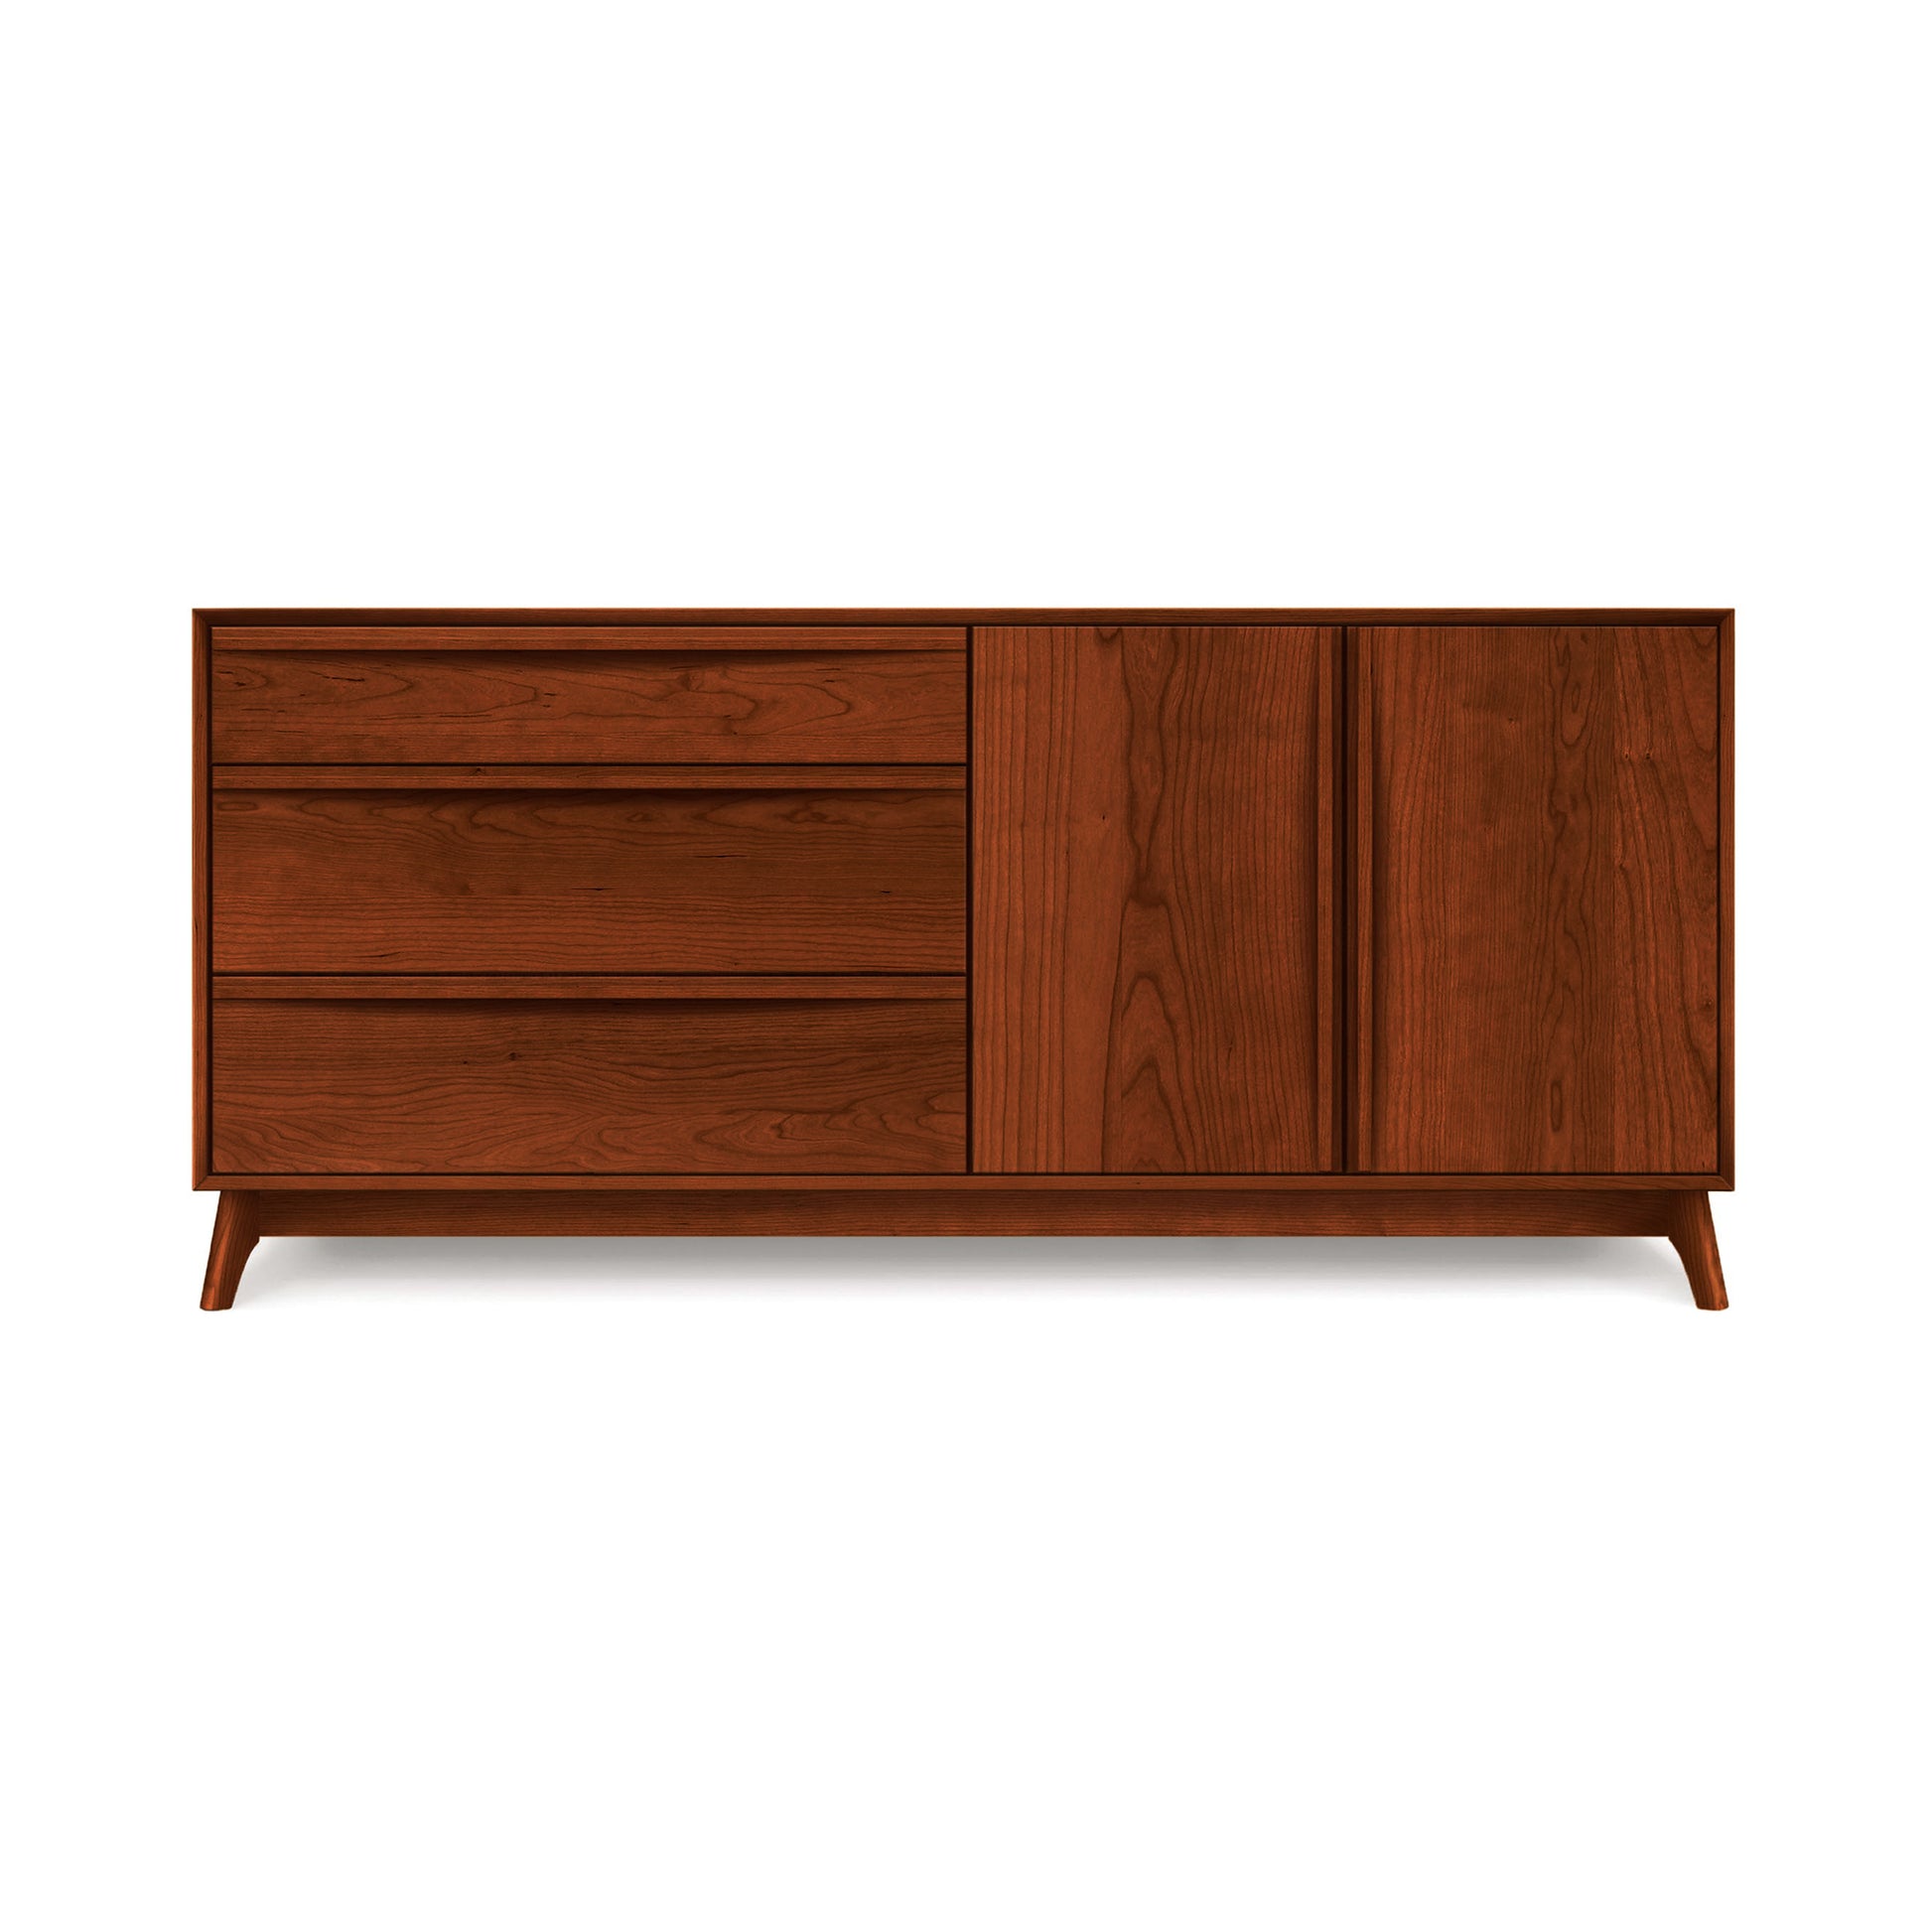 A Catalina 3-Drawers, 2-Door Buffet with sliding doors and tapered legs against a white background.